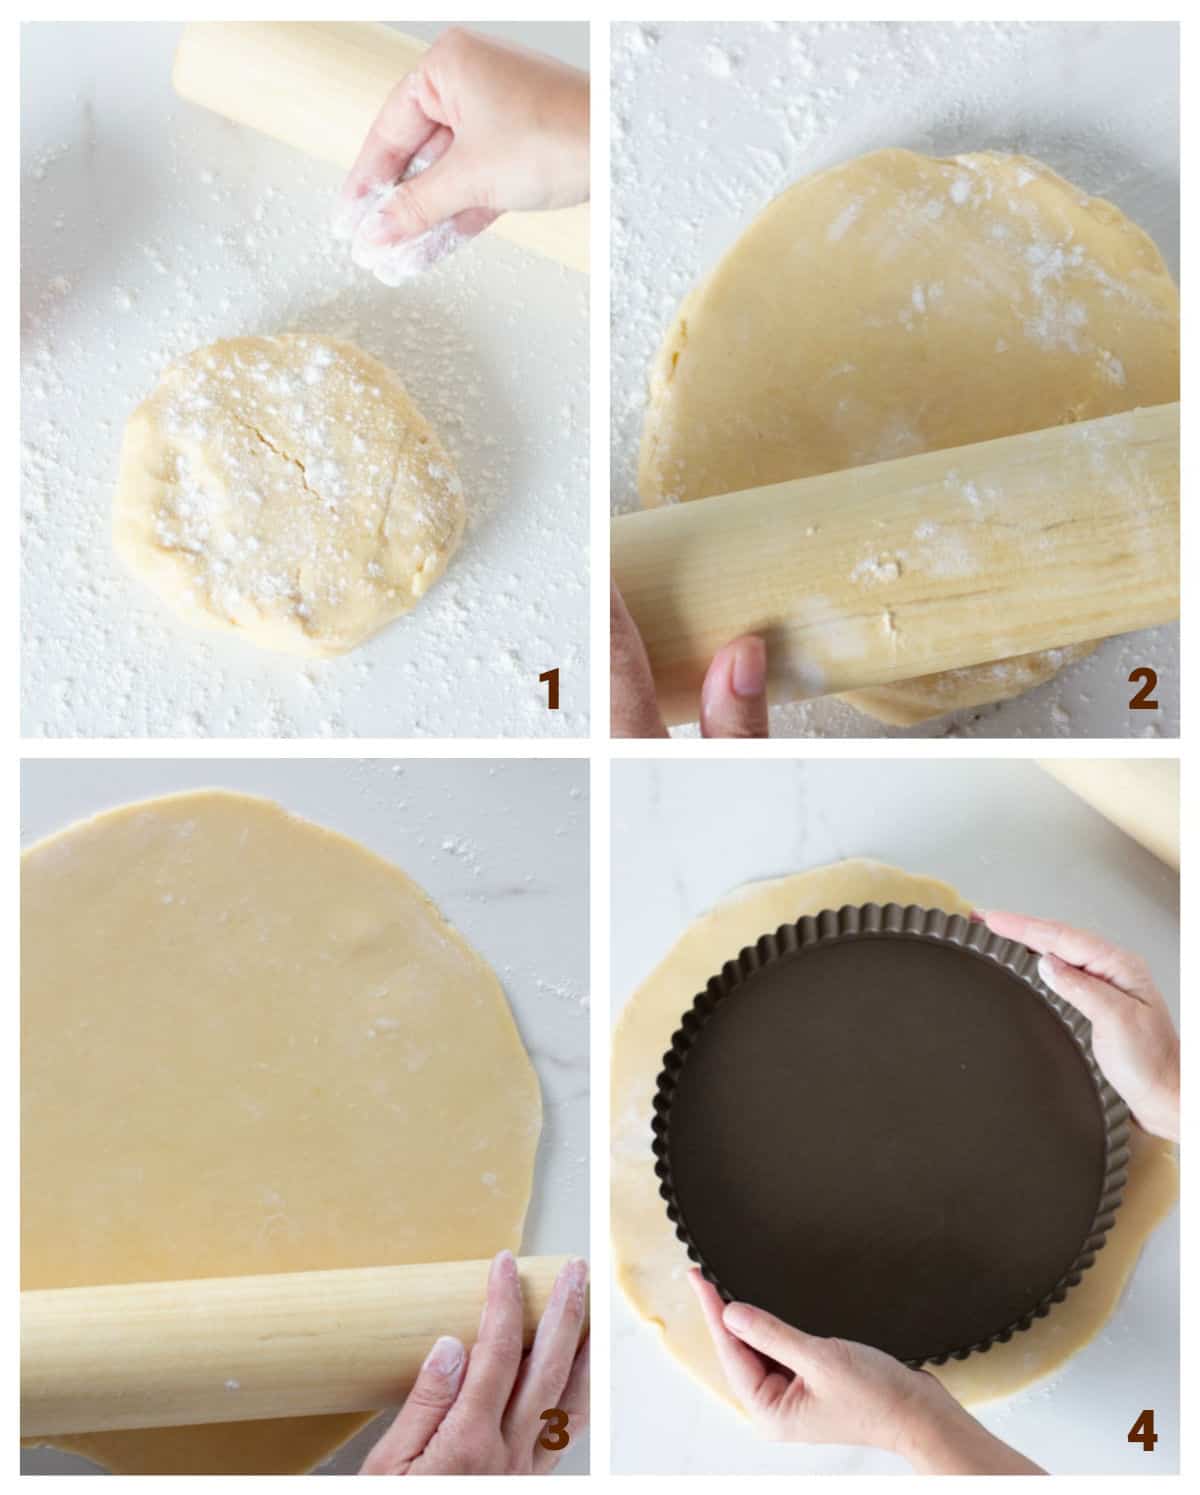 Collage showing hands rolling pie dough with rolling pin on white surface and measuring pie pan